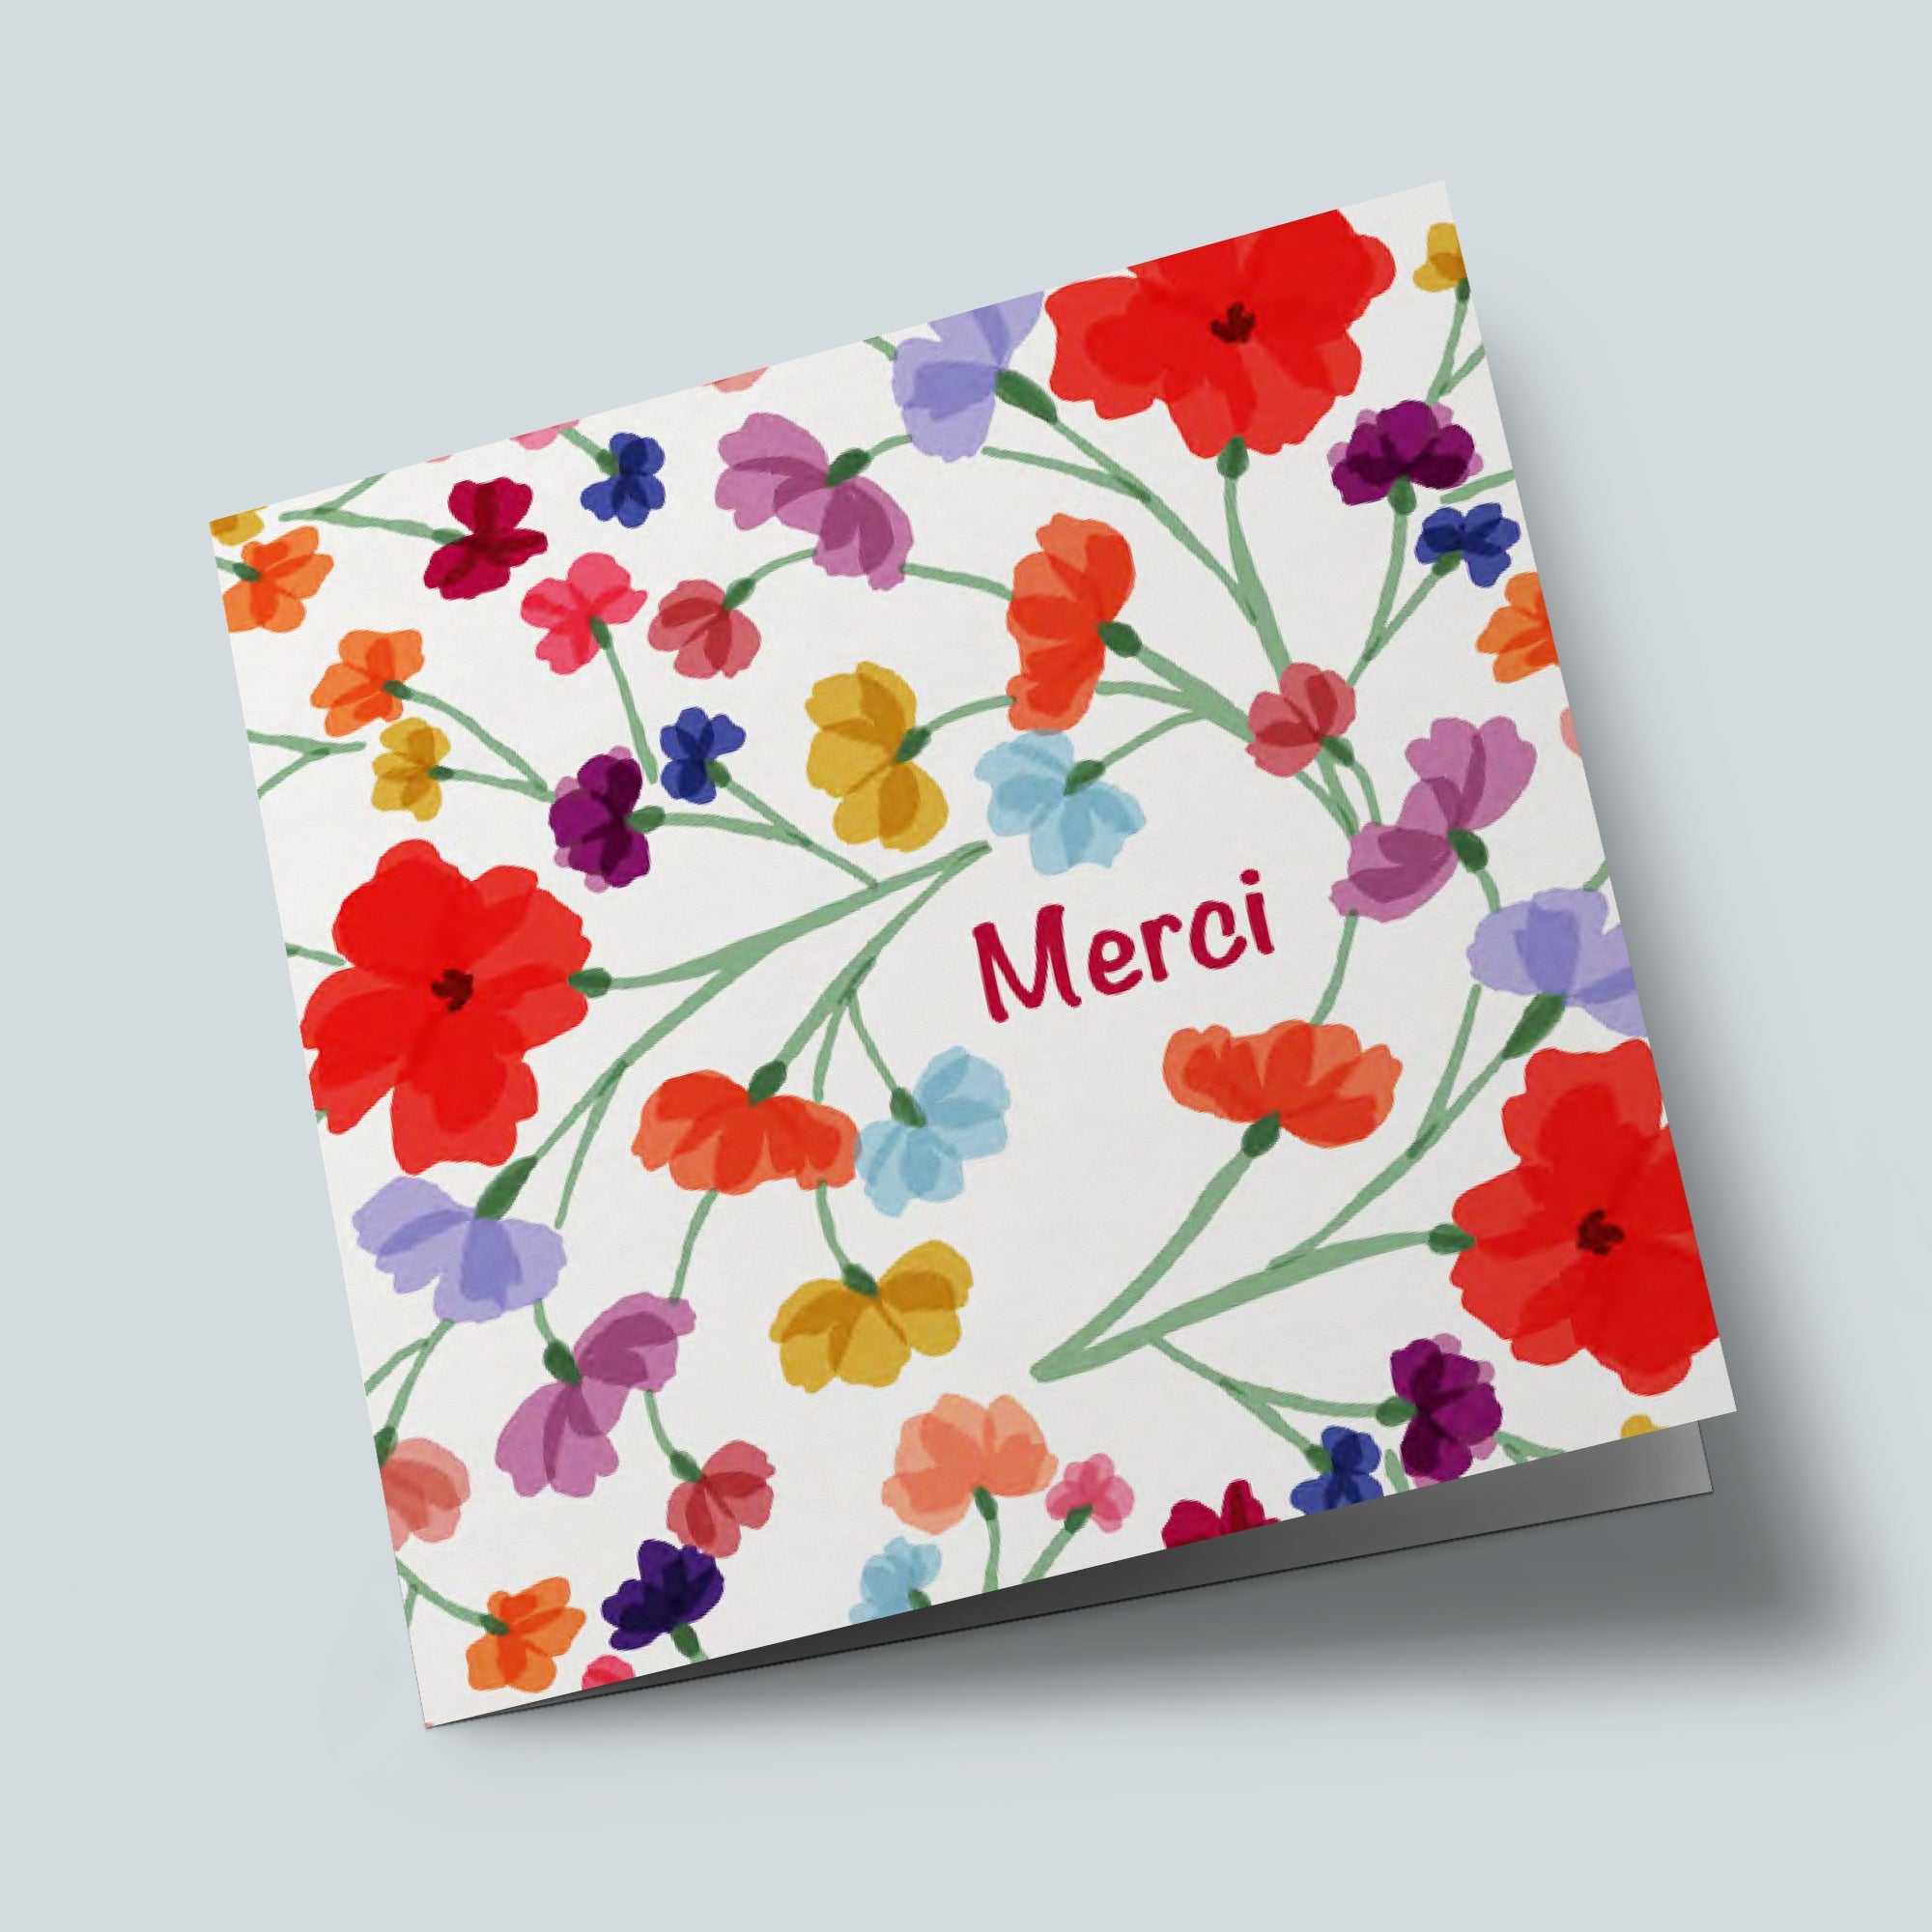 The Little Flowers - Merci - Red, Blue, Orange and Yellow Flowers